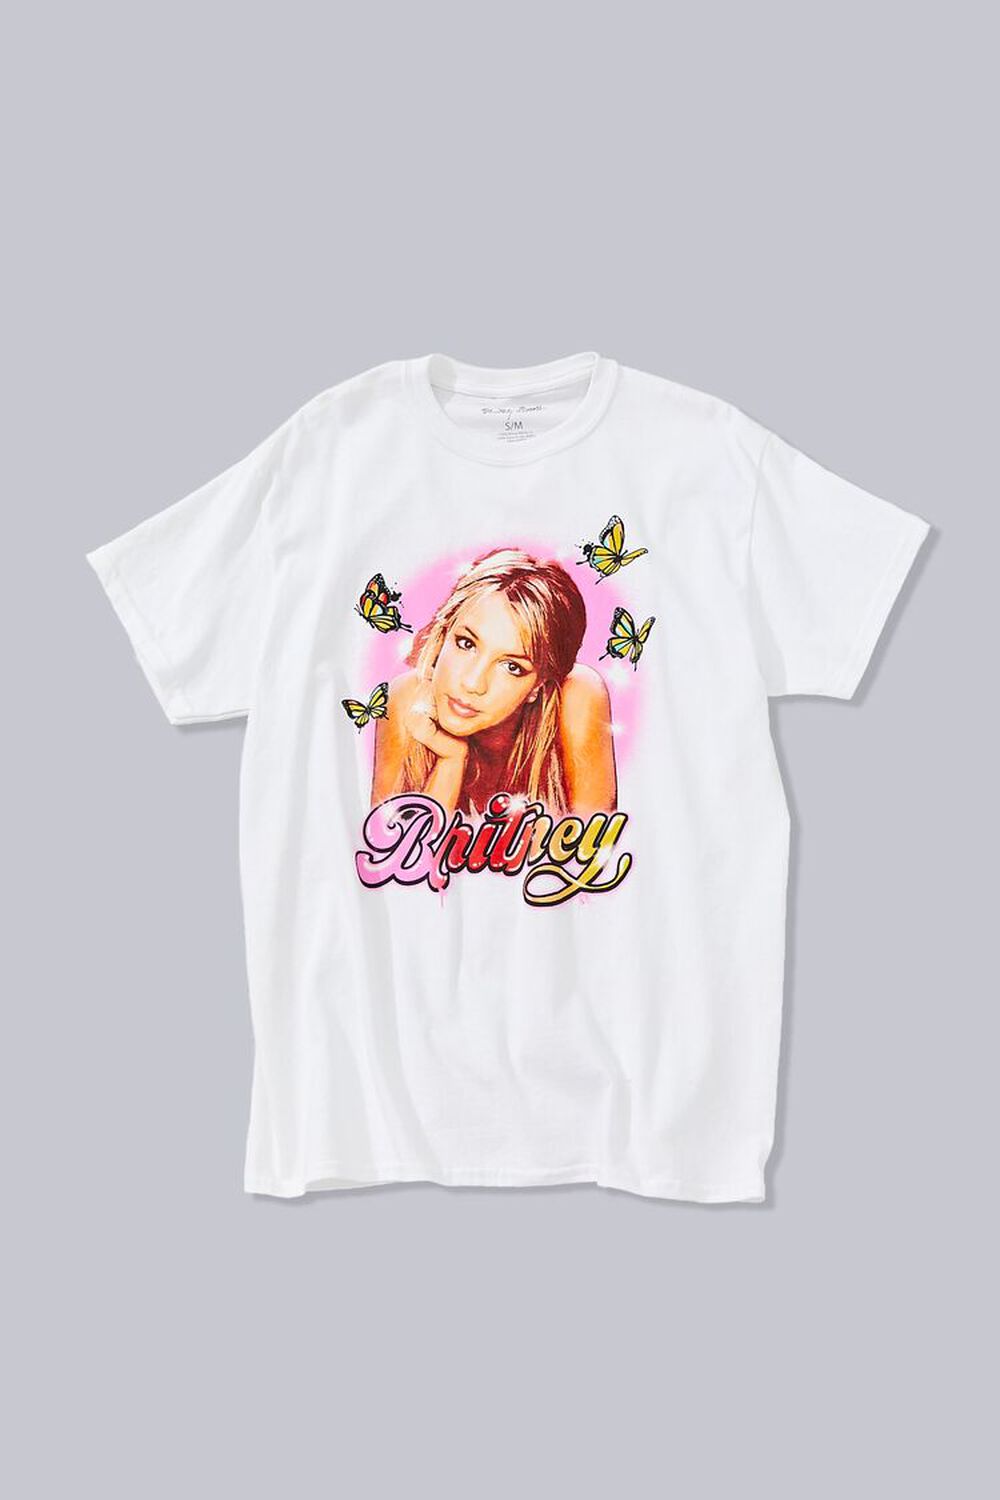 WHITE/MULTI Britney Spears Graphic Tee, image 1